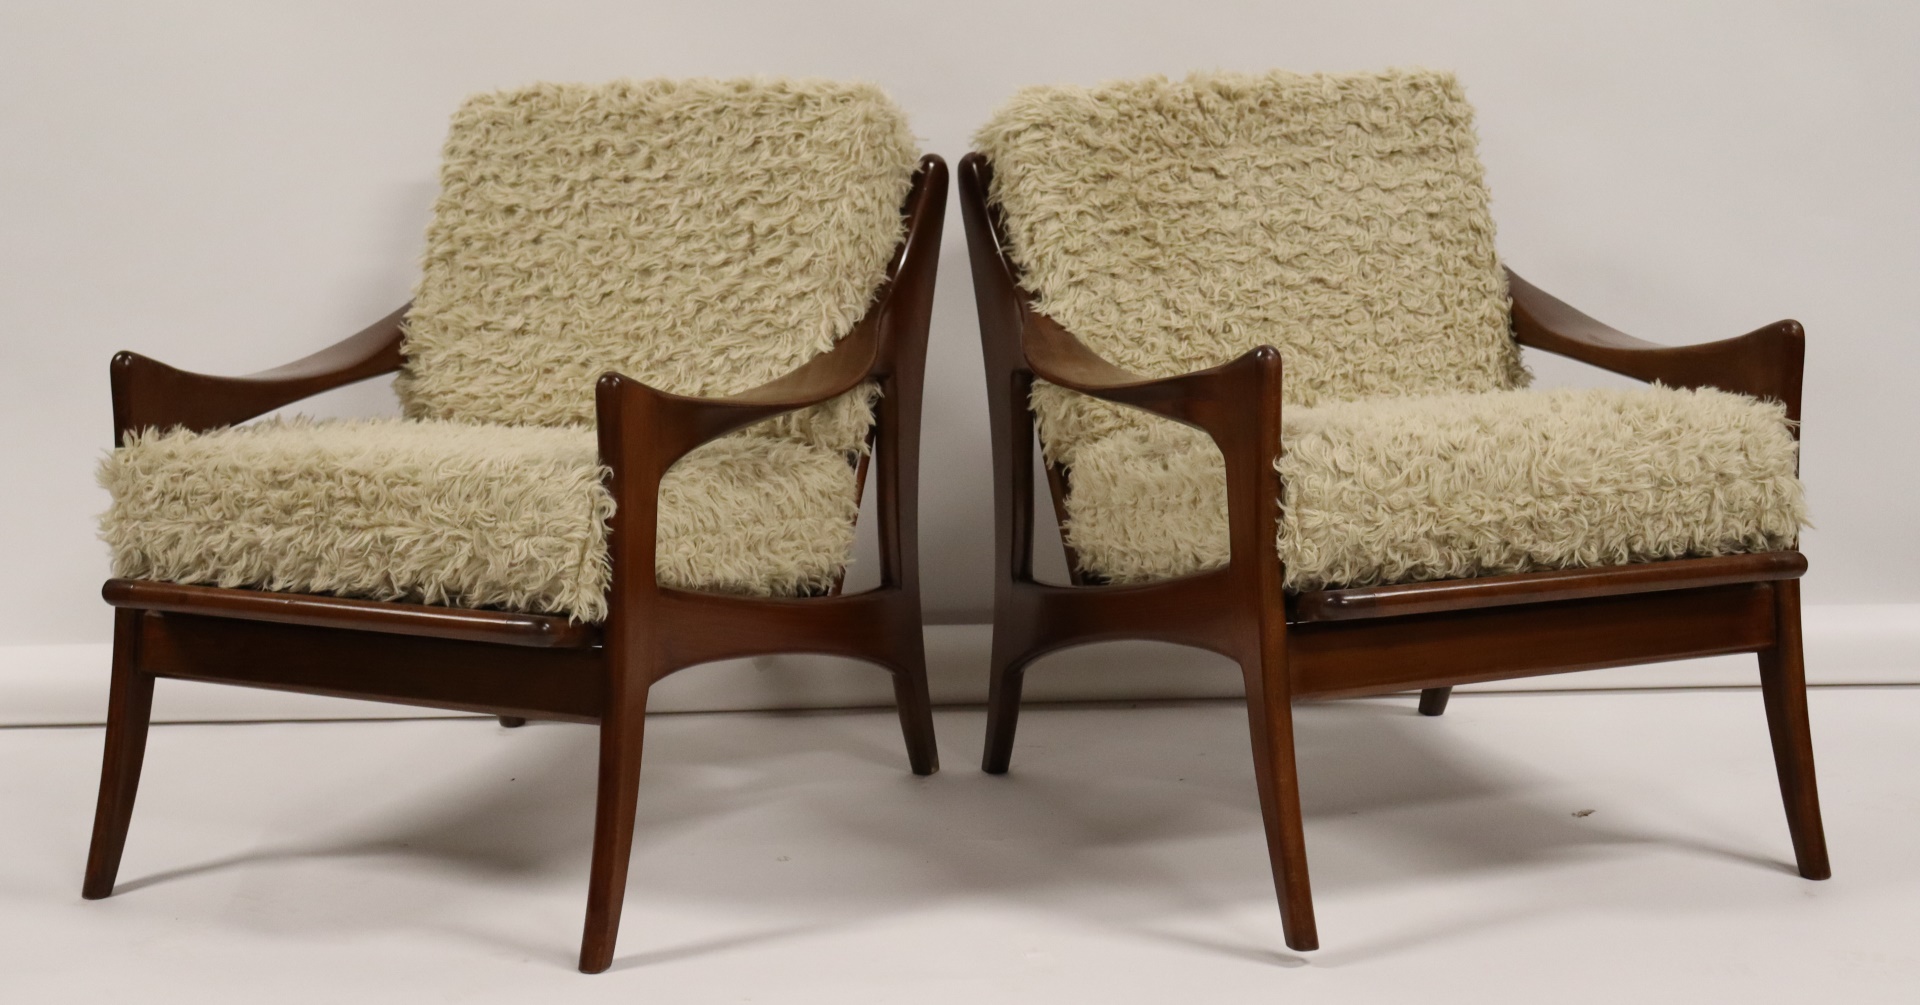 MIDCENTURY STYLE PAIR OF WOOL UPHOLSTERED 3b8db6